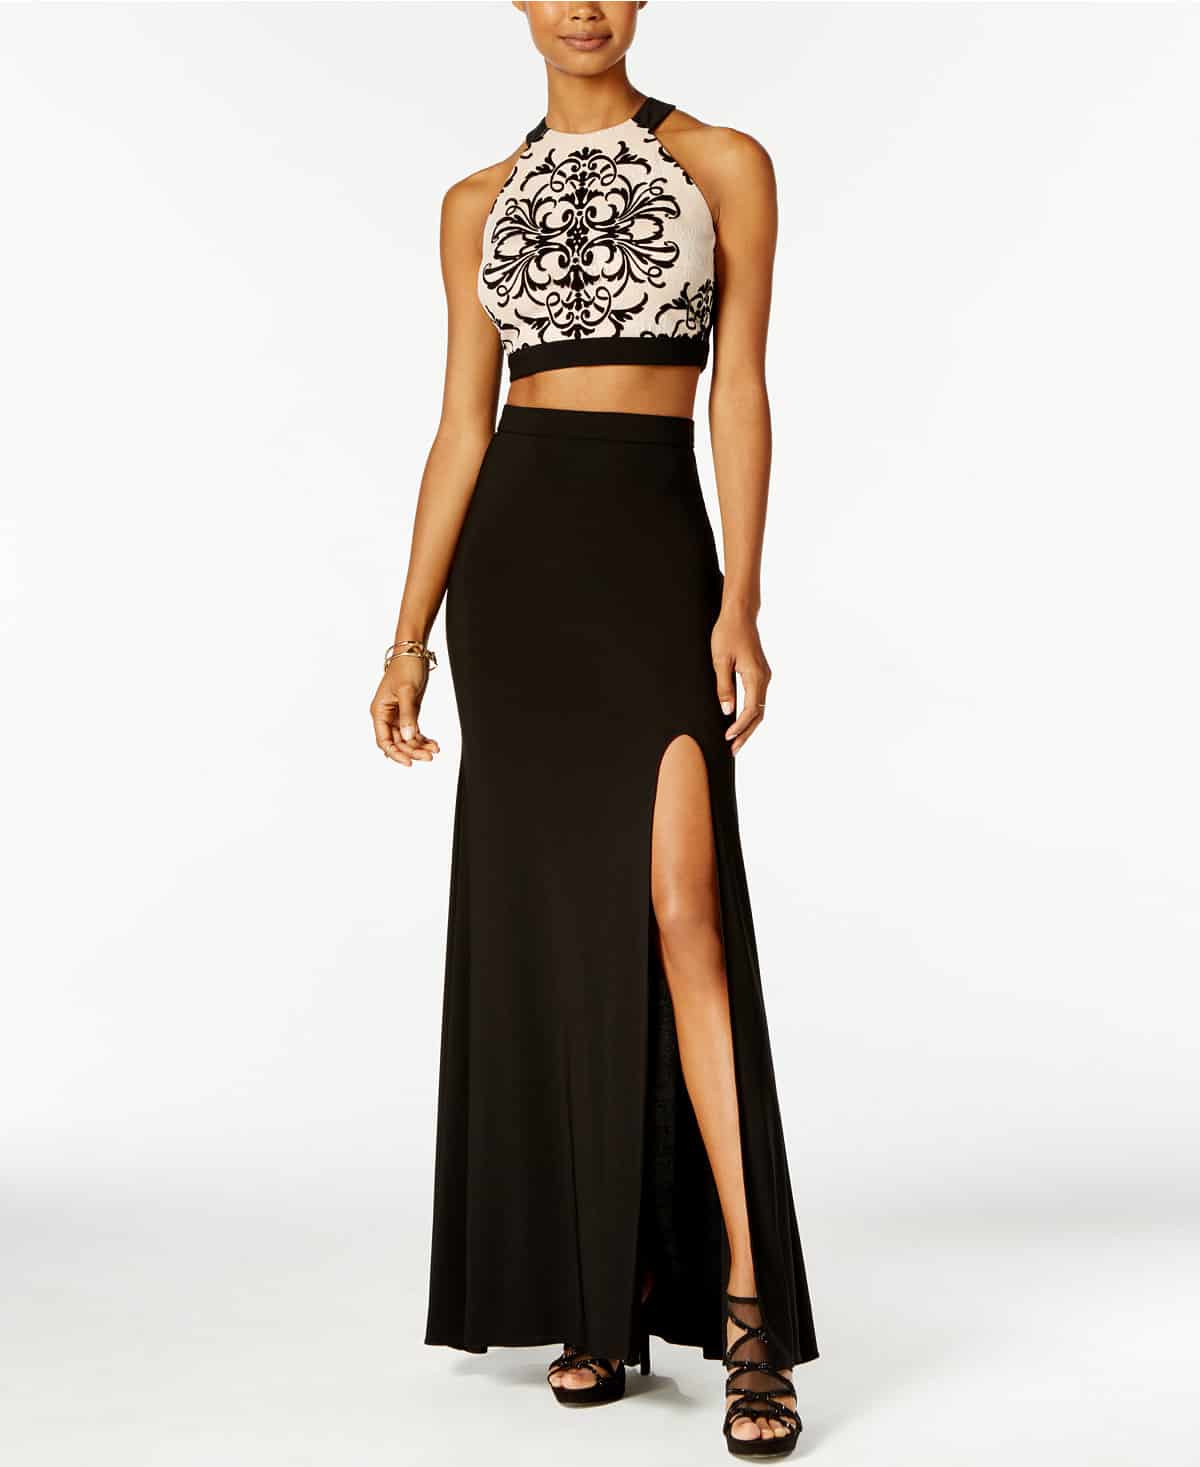 prom dress trends - the two-piece dress, a crop top and high-waited, full skirt